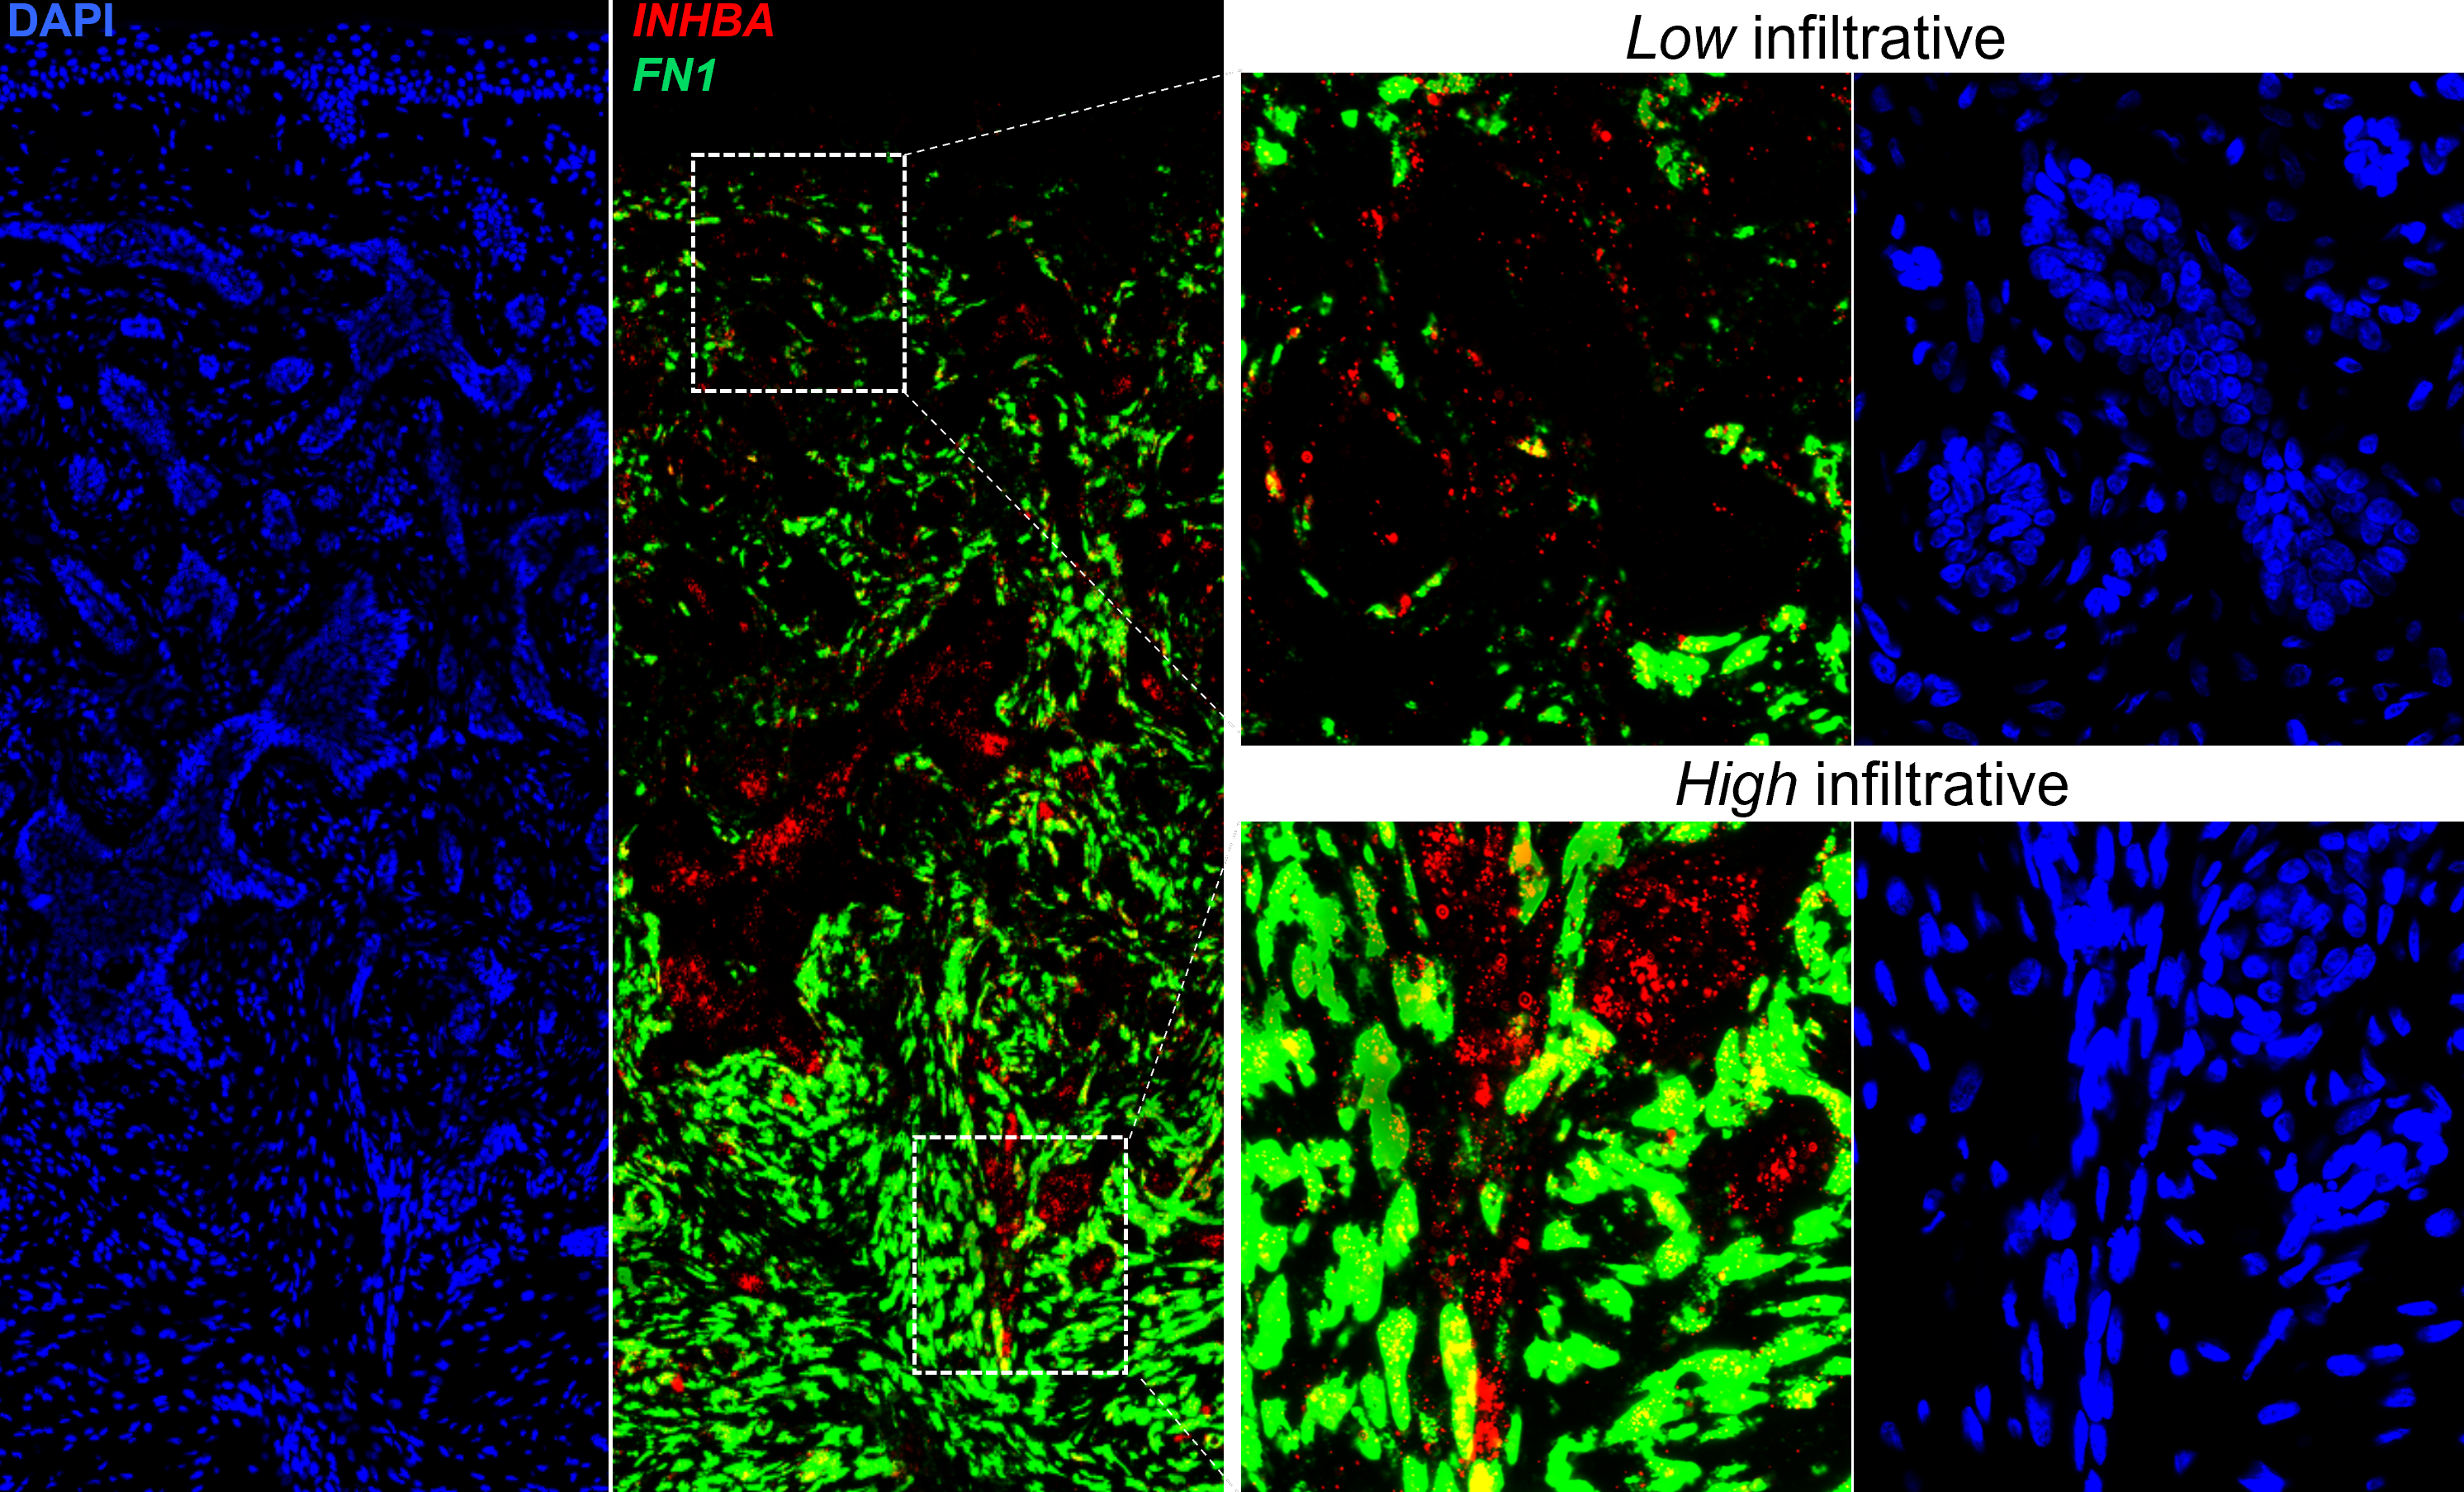 RNA FISH staining for <em>INHBA</em> (red) and <em>FN1</em> (green) illustrating associated morphological progression and reprogramming in cancer cells and surrounding microenvironment in basal cell carcinoma.